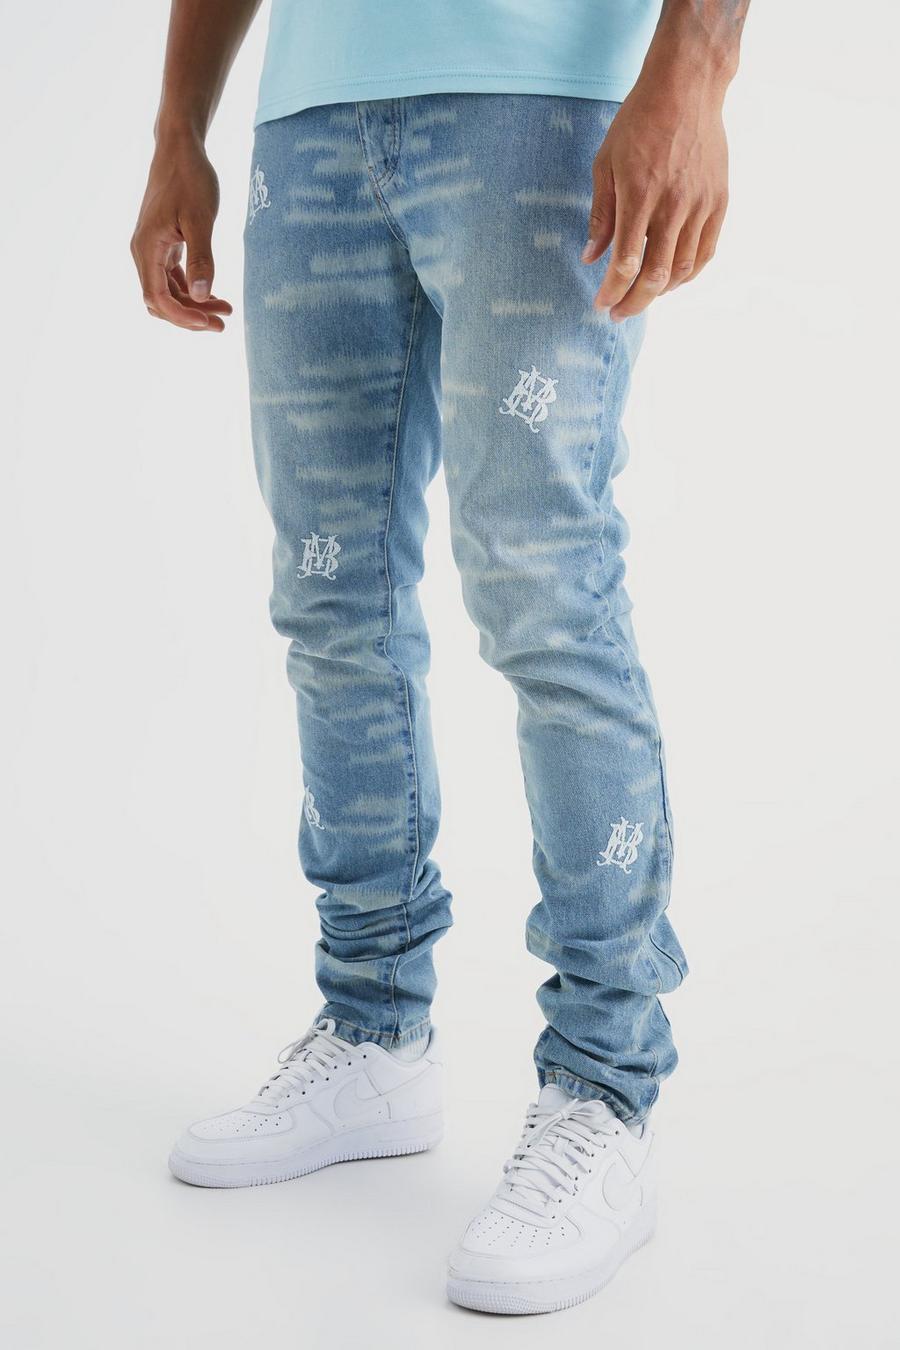 Mens Stacked Rippedjeans Stylish Jeans For Men High Quality Mens Designer  Jeans - Buy Mens Jeans,Men's Jeans With Pockets,Men's Jeans Wear Product on